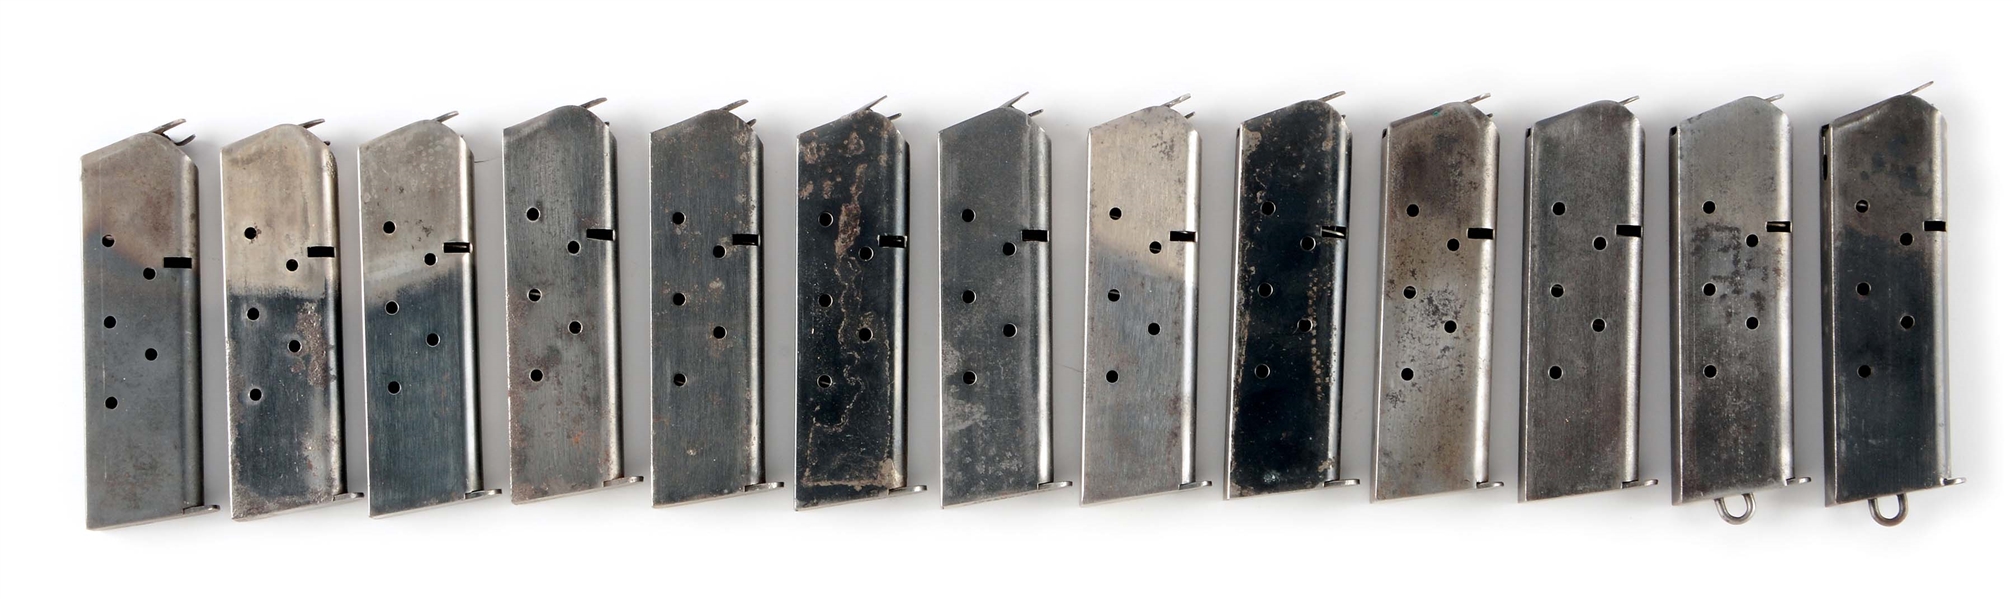 LOT OF 13: COLT MODEL 1911A1 MAGAZINES FEATURING "KEYHOLE" EXAMPLE.